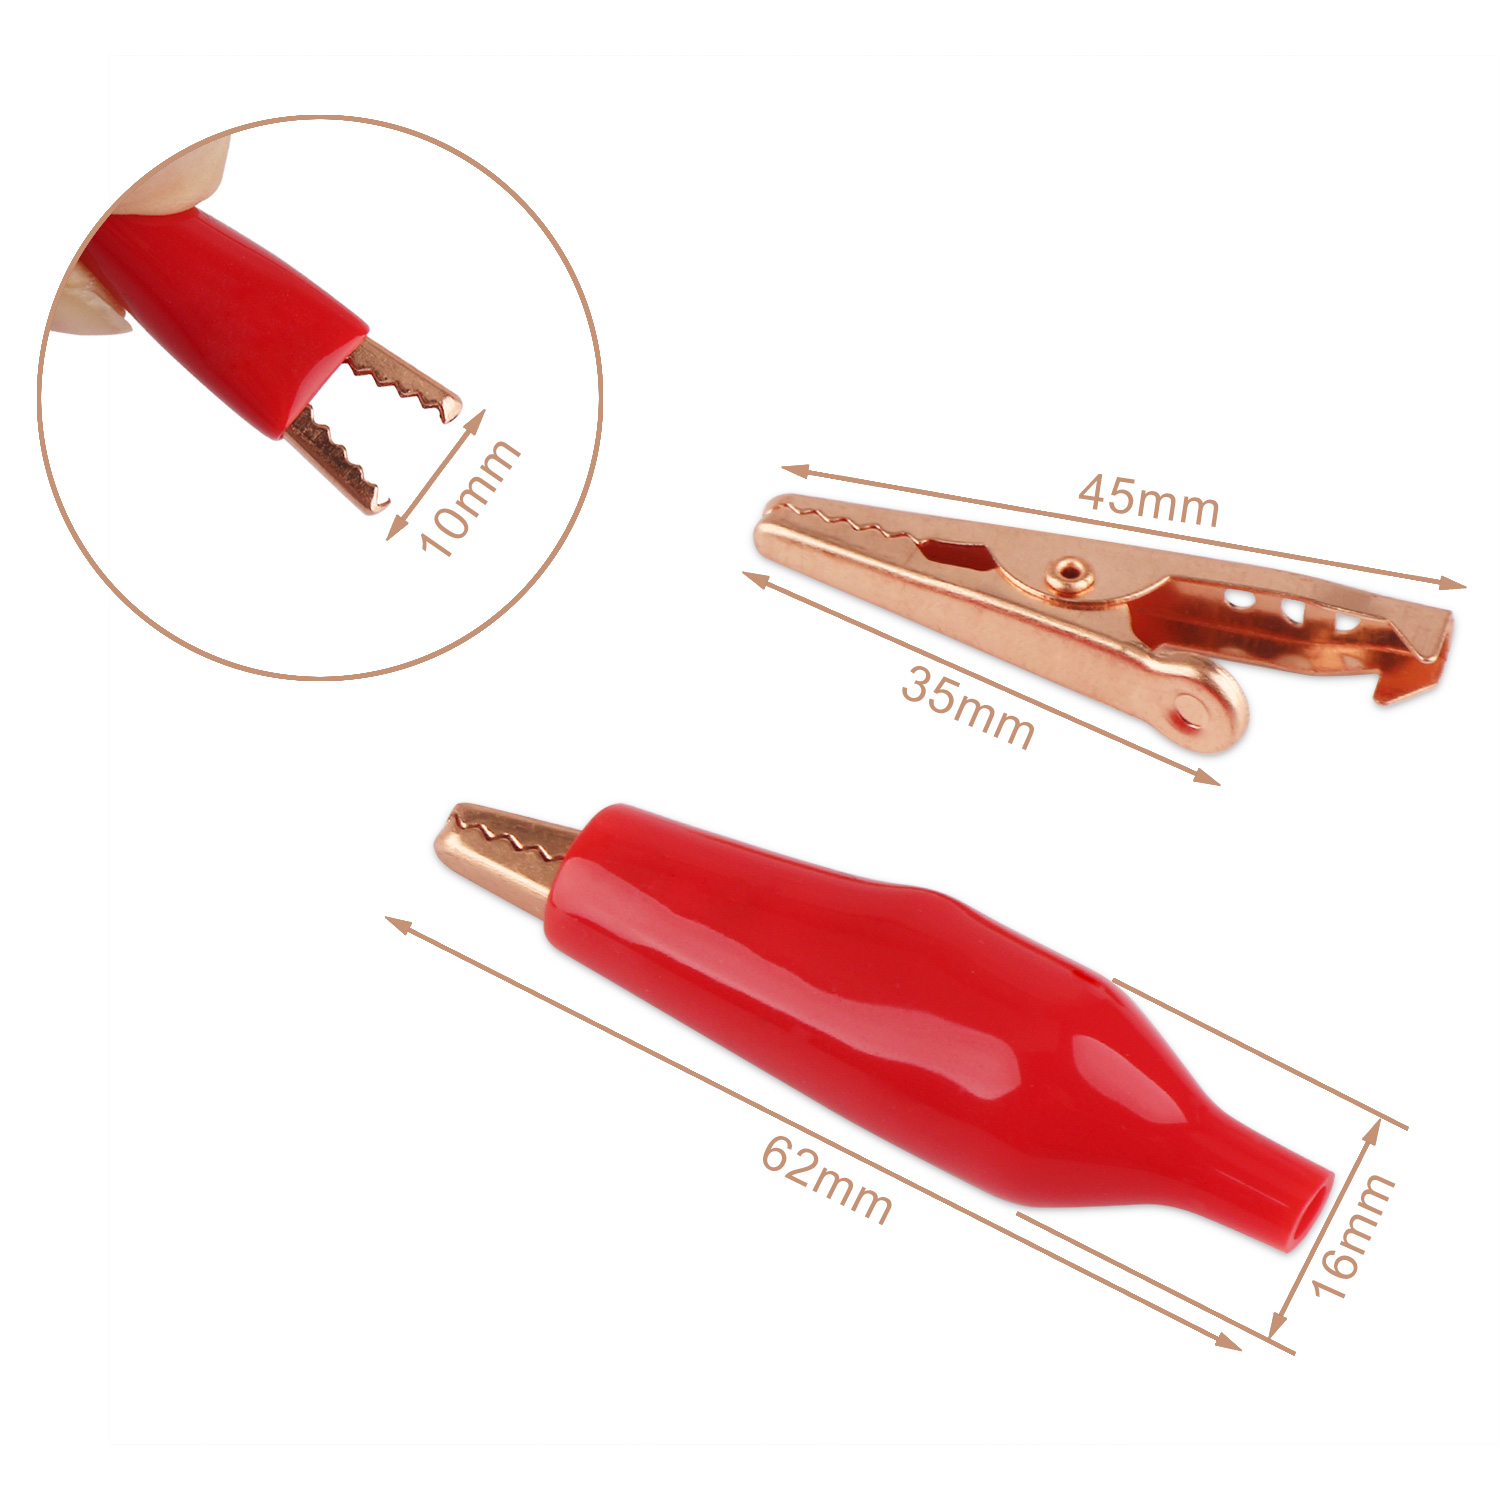 Crocodile Clip Red Insulated Test Leads Alligator Connector 45mm